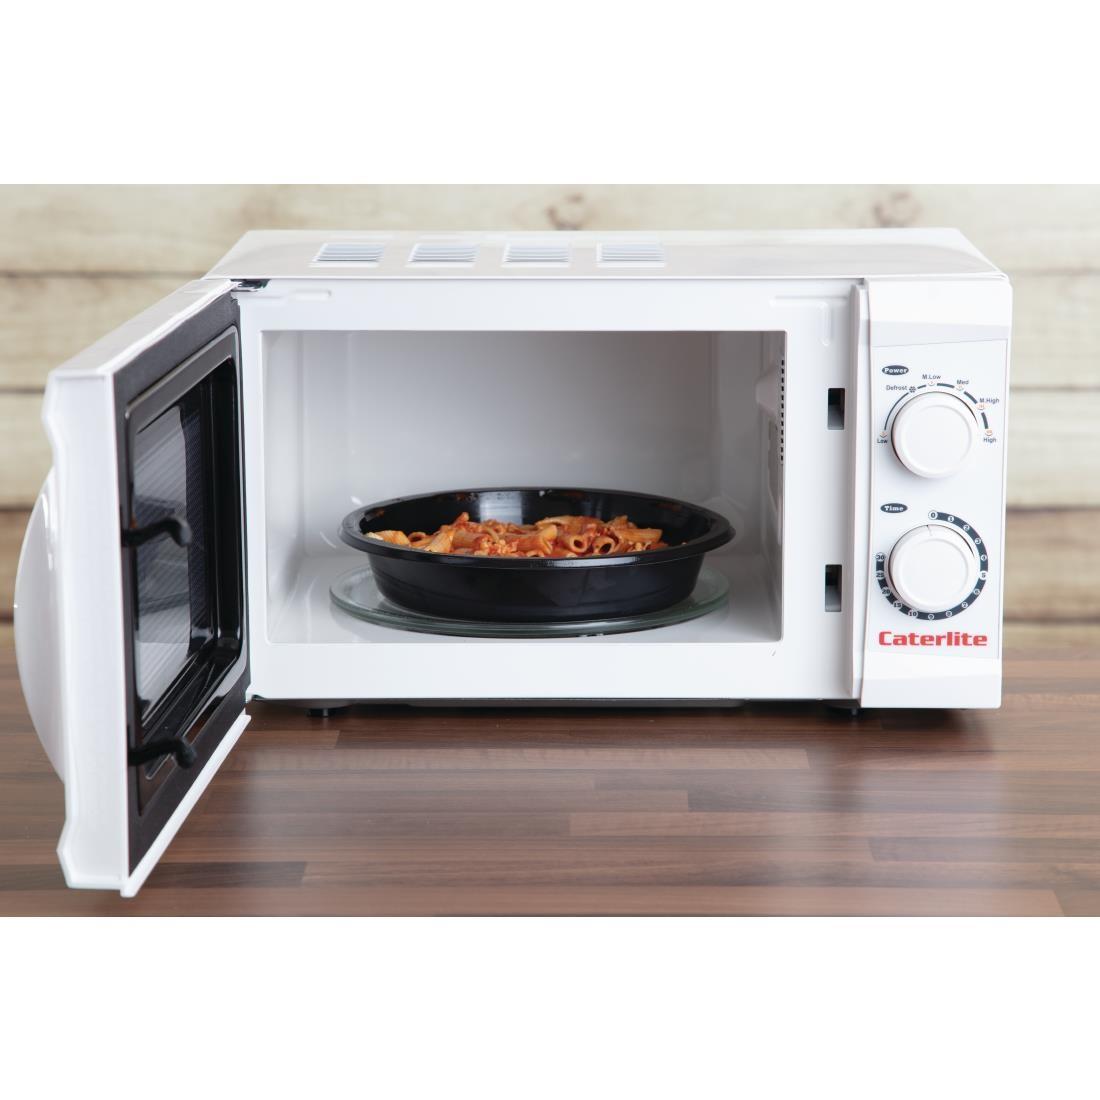 Caterlite Compact Microwave 17ltr 700W - CN180  - 5